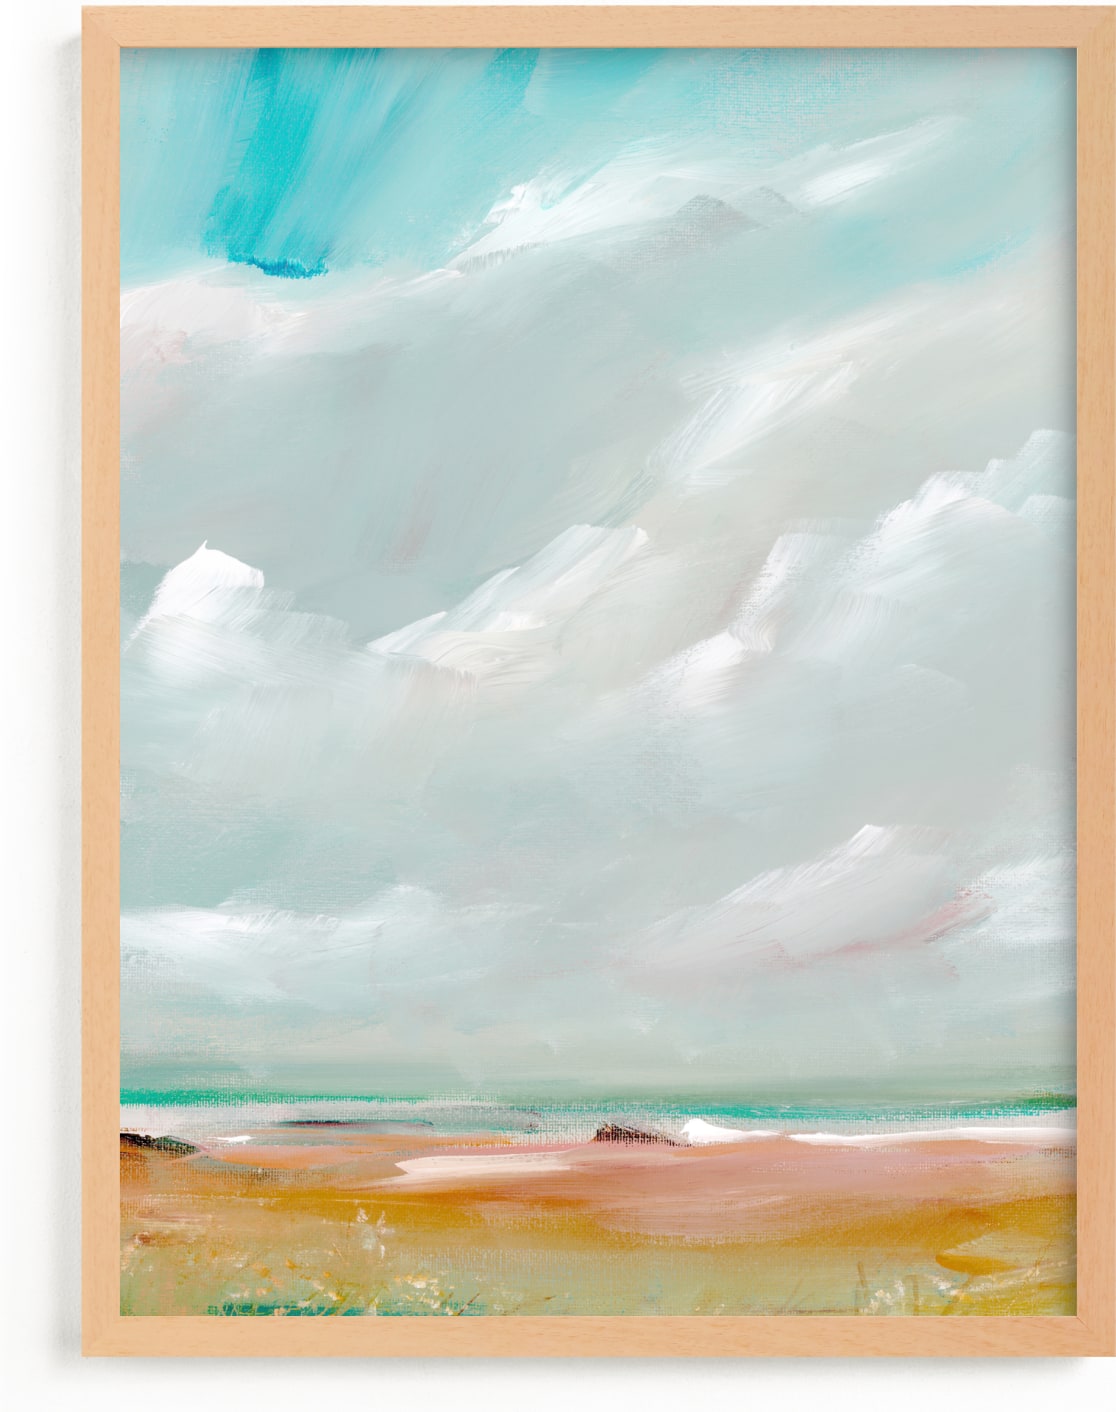 This is a blue art by Lindsay Megahed called Sea Shore.